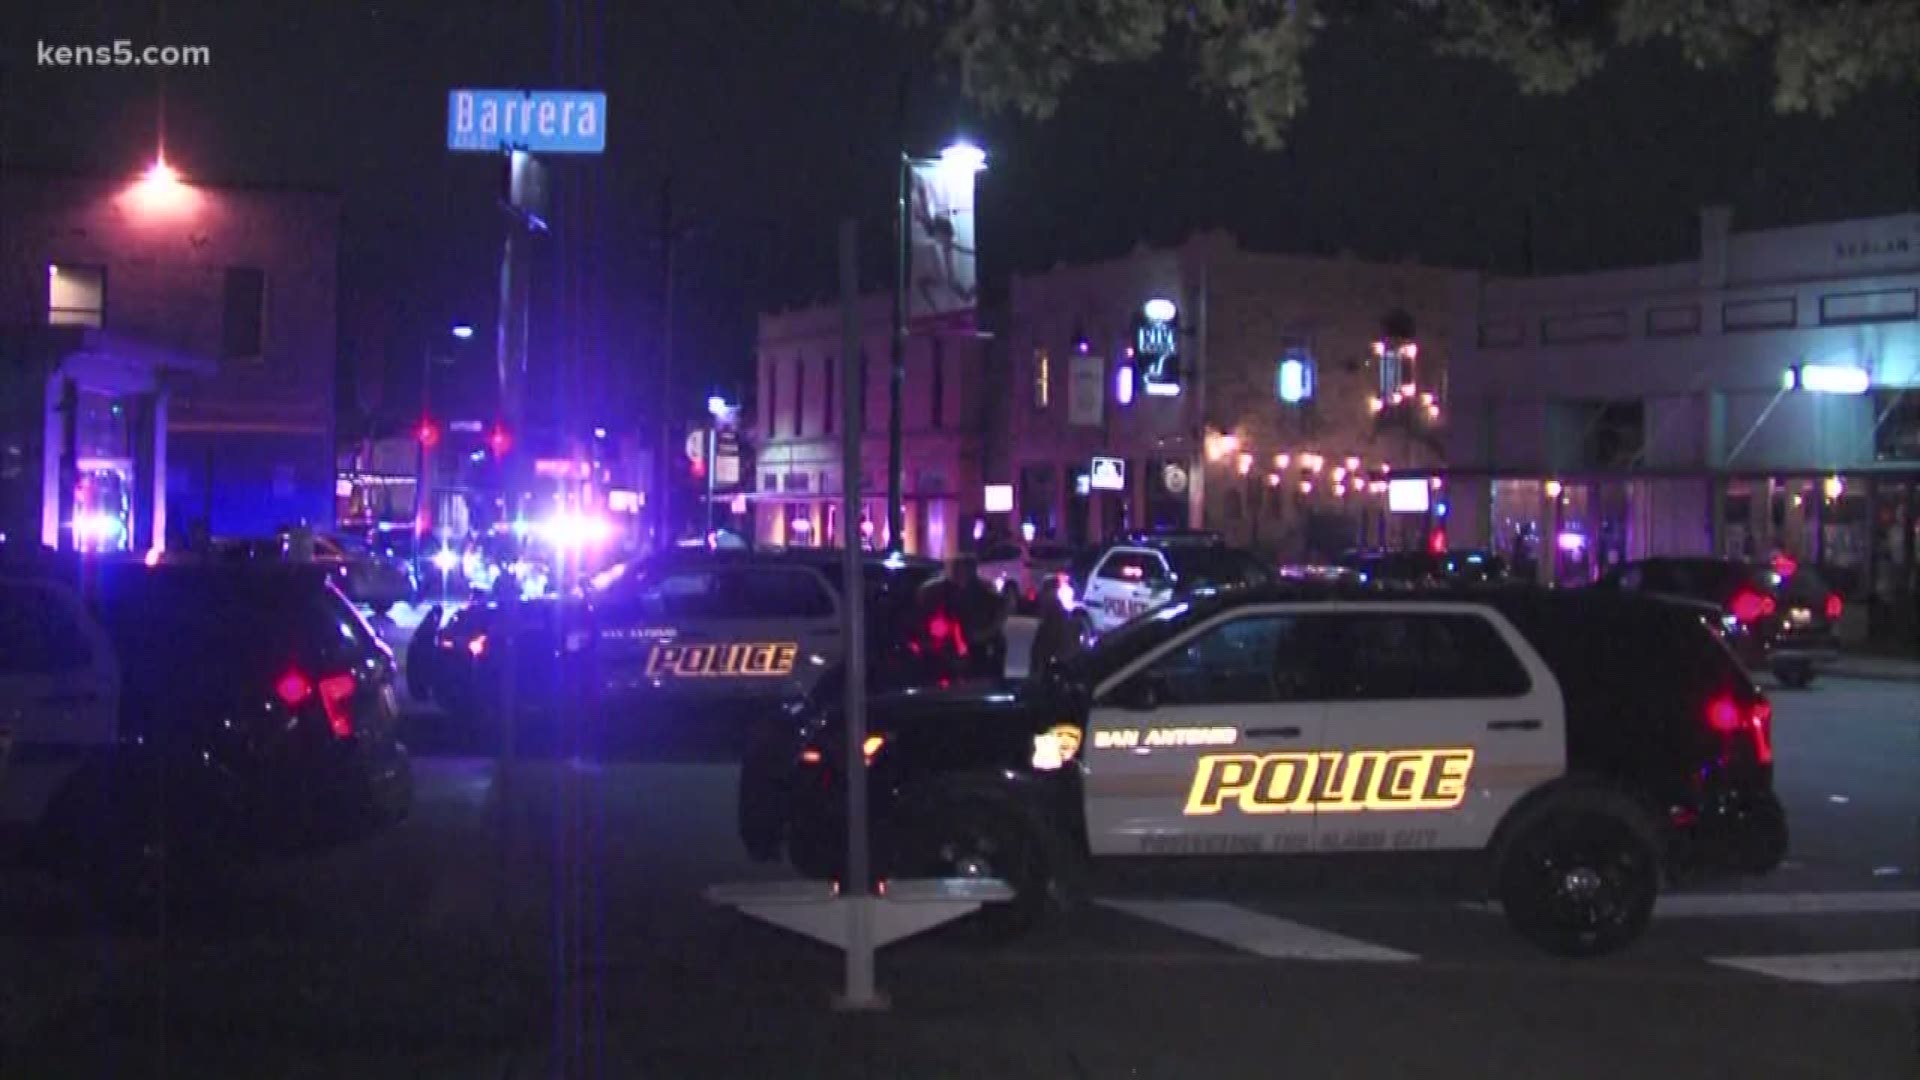 Police have arrested a man suspected of shooting two people outside a popular San Antonio bar overnight.